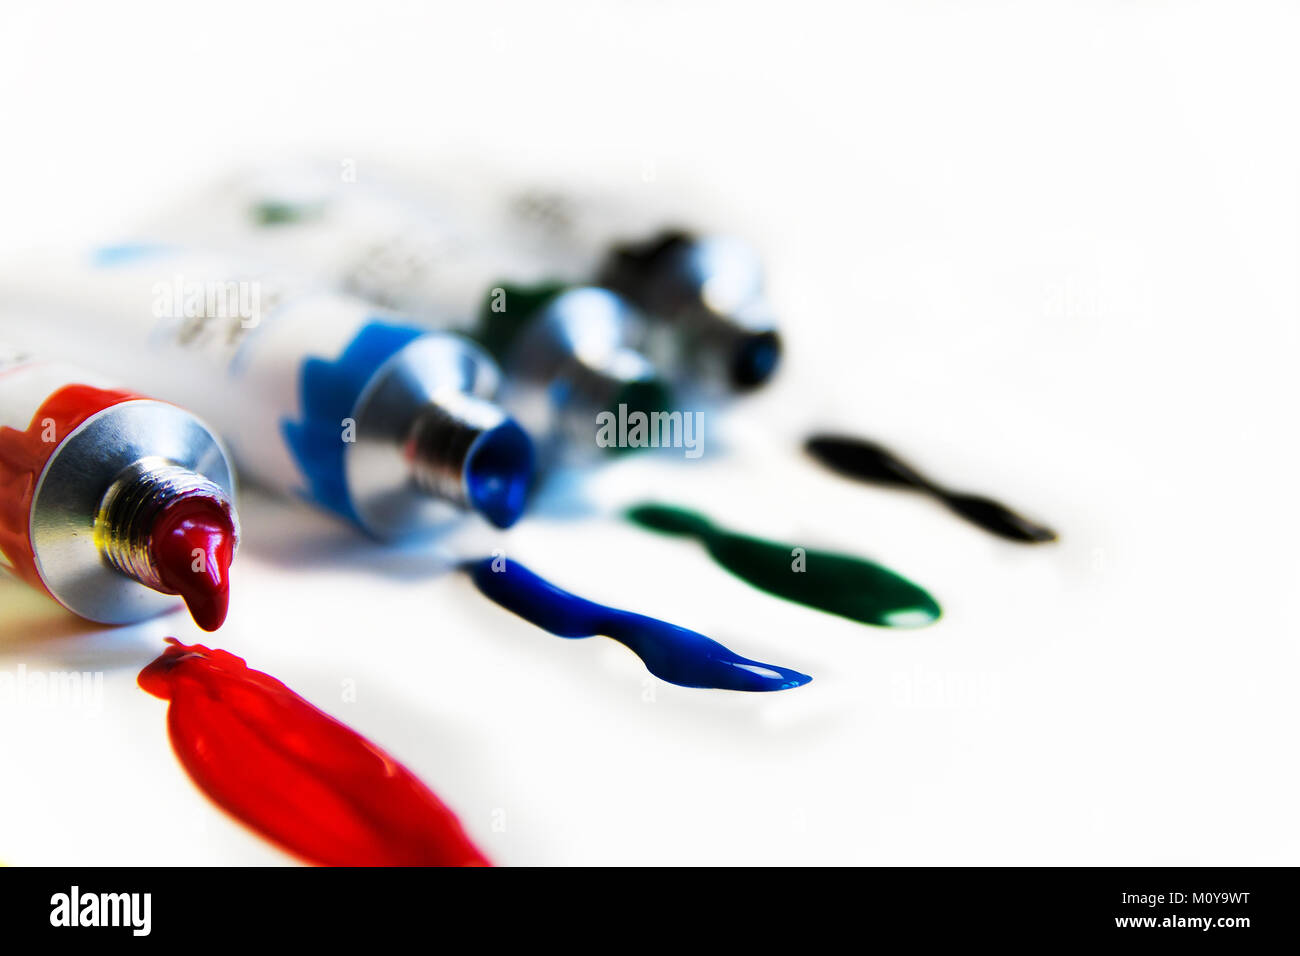 red, blue, green, black colored acrylic paints for drawing in tubes Stock Photo